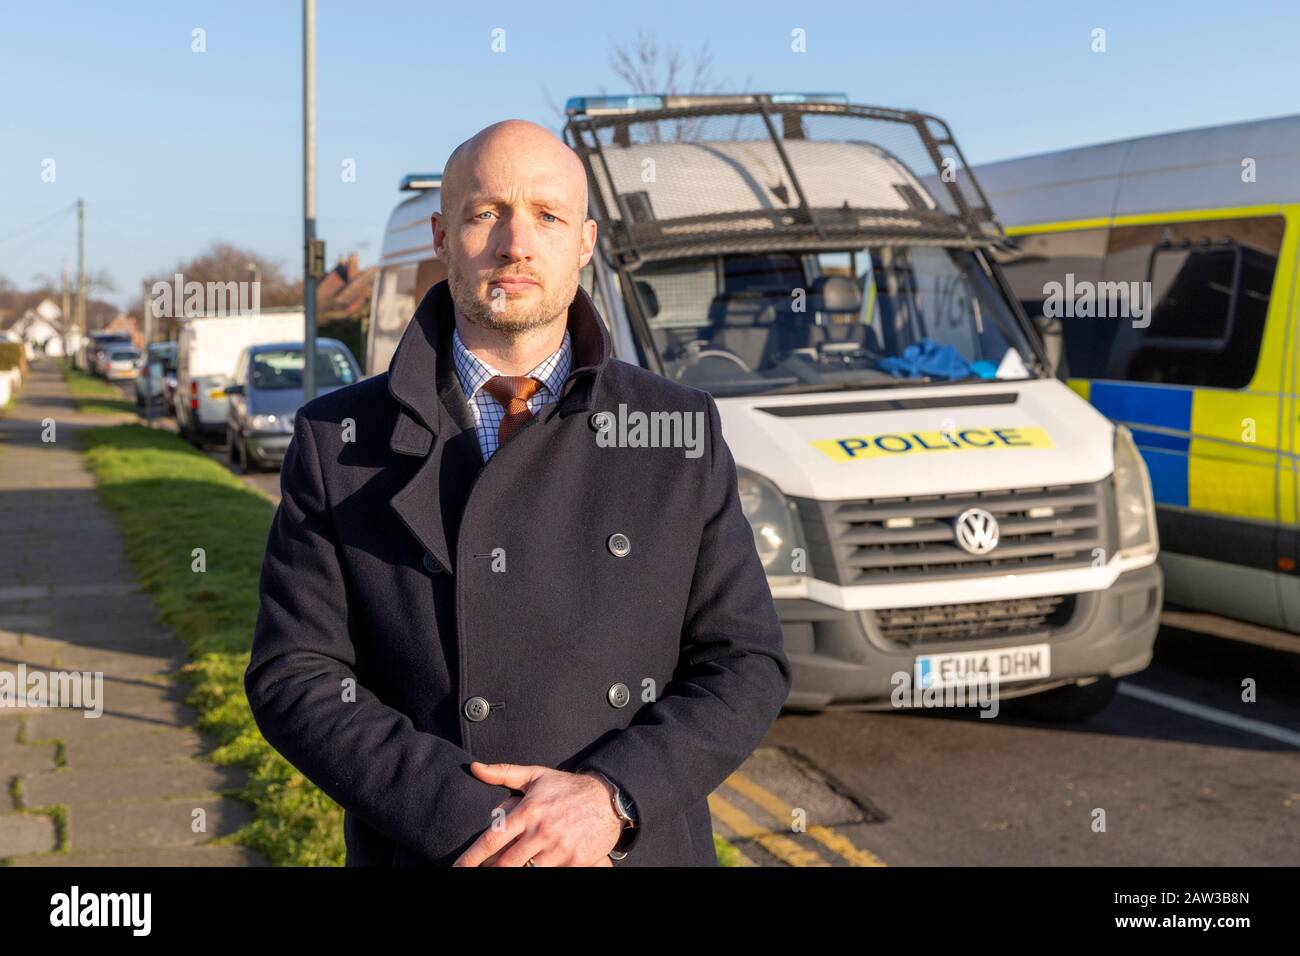 Clacton, Essex, UK. 6th Feb 2020. Essex Police execute County Lines drug dealing search warrants across Essex and London, resulting in a number of arrests and seizure of class a drugs and cash. Detective Chief Inspector Paul Wells pictured at one of the addresses in Clacton. Credit: Ricci Fothergill/Alamy Live News Stock Photo